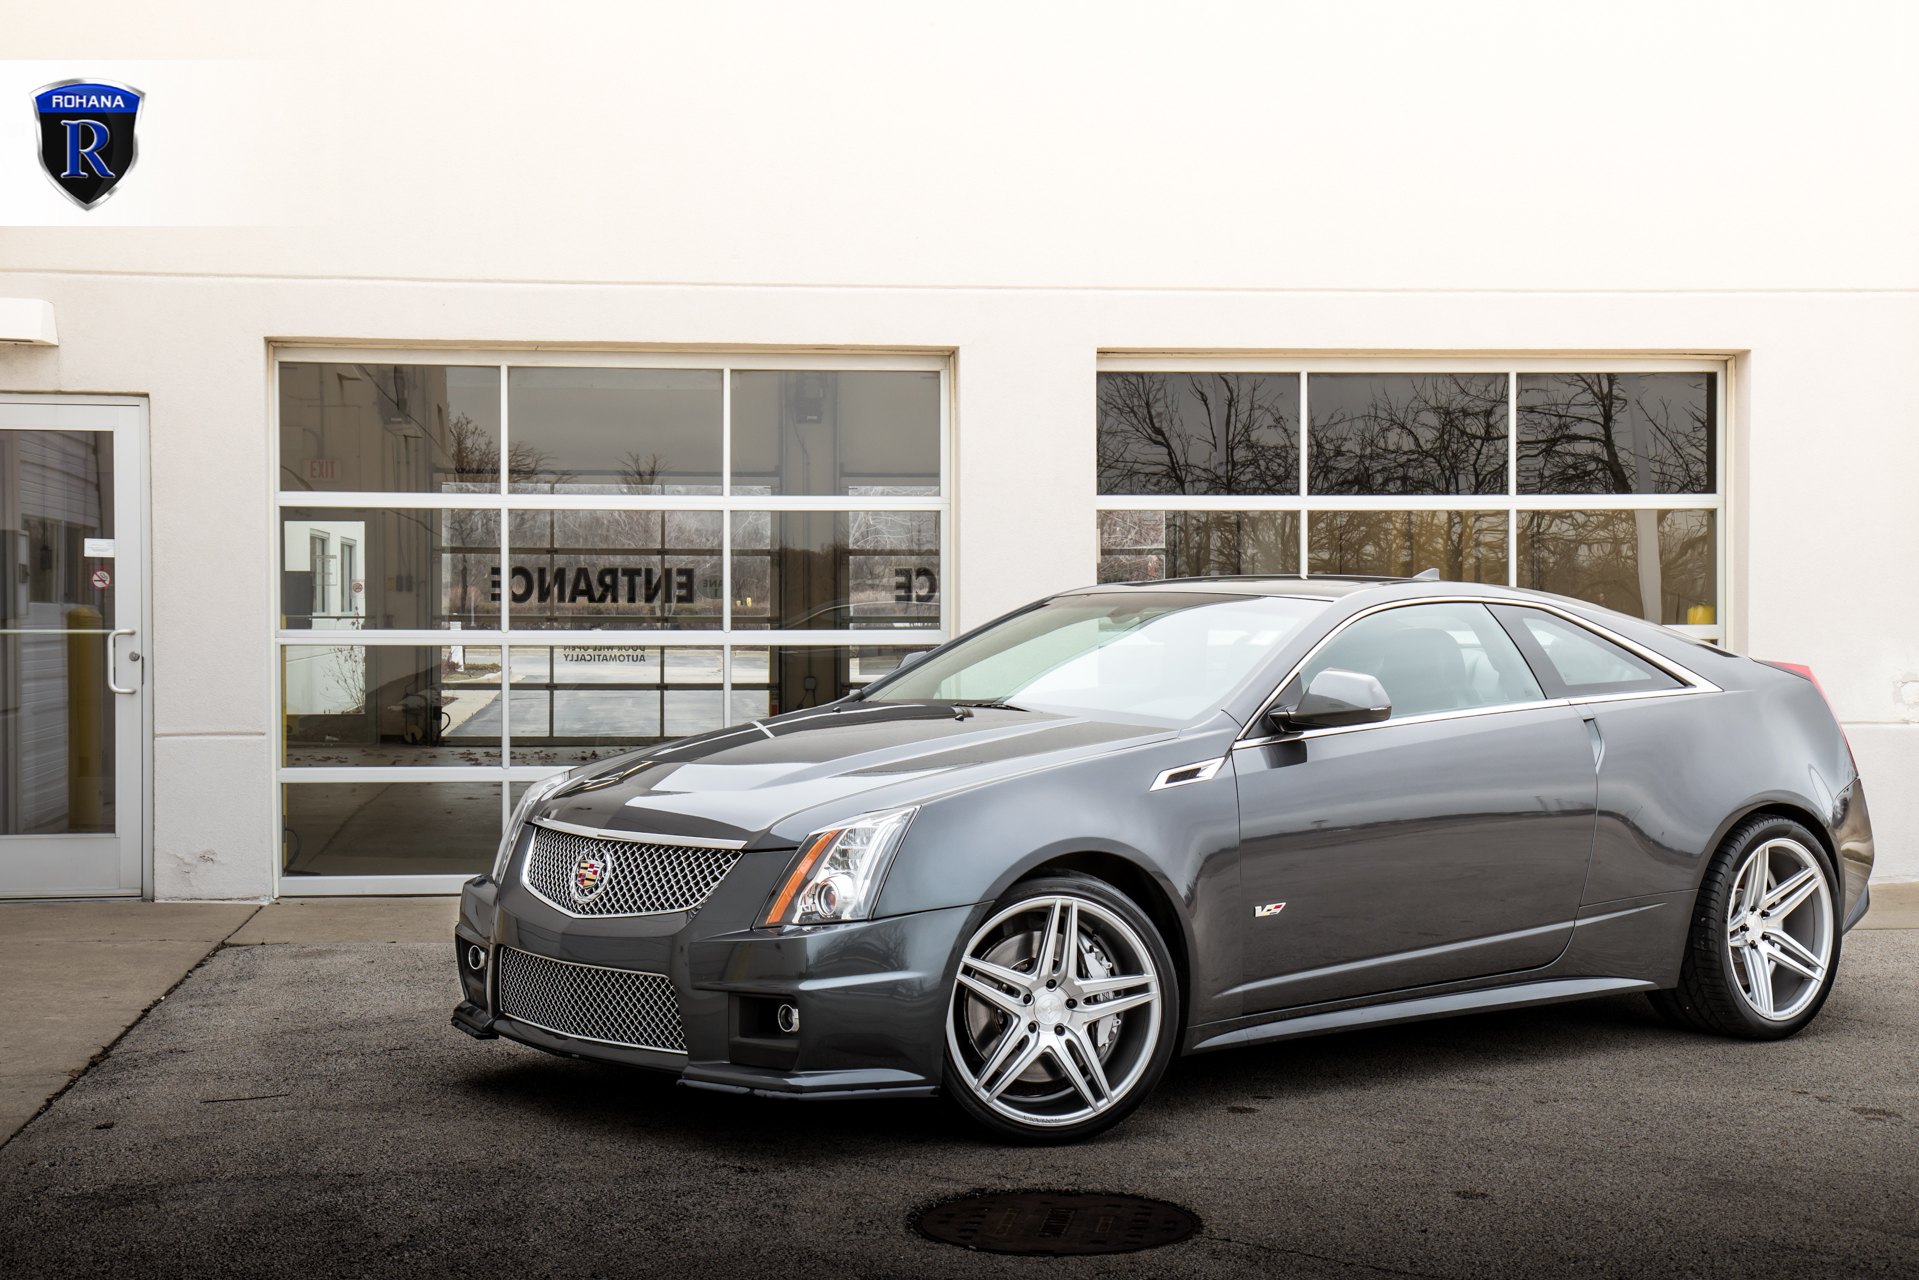 Chrome Mesh Grille on Gray Cadillac CTS - Photo by Rohana